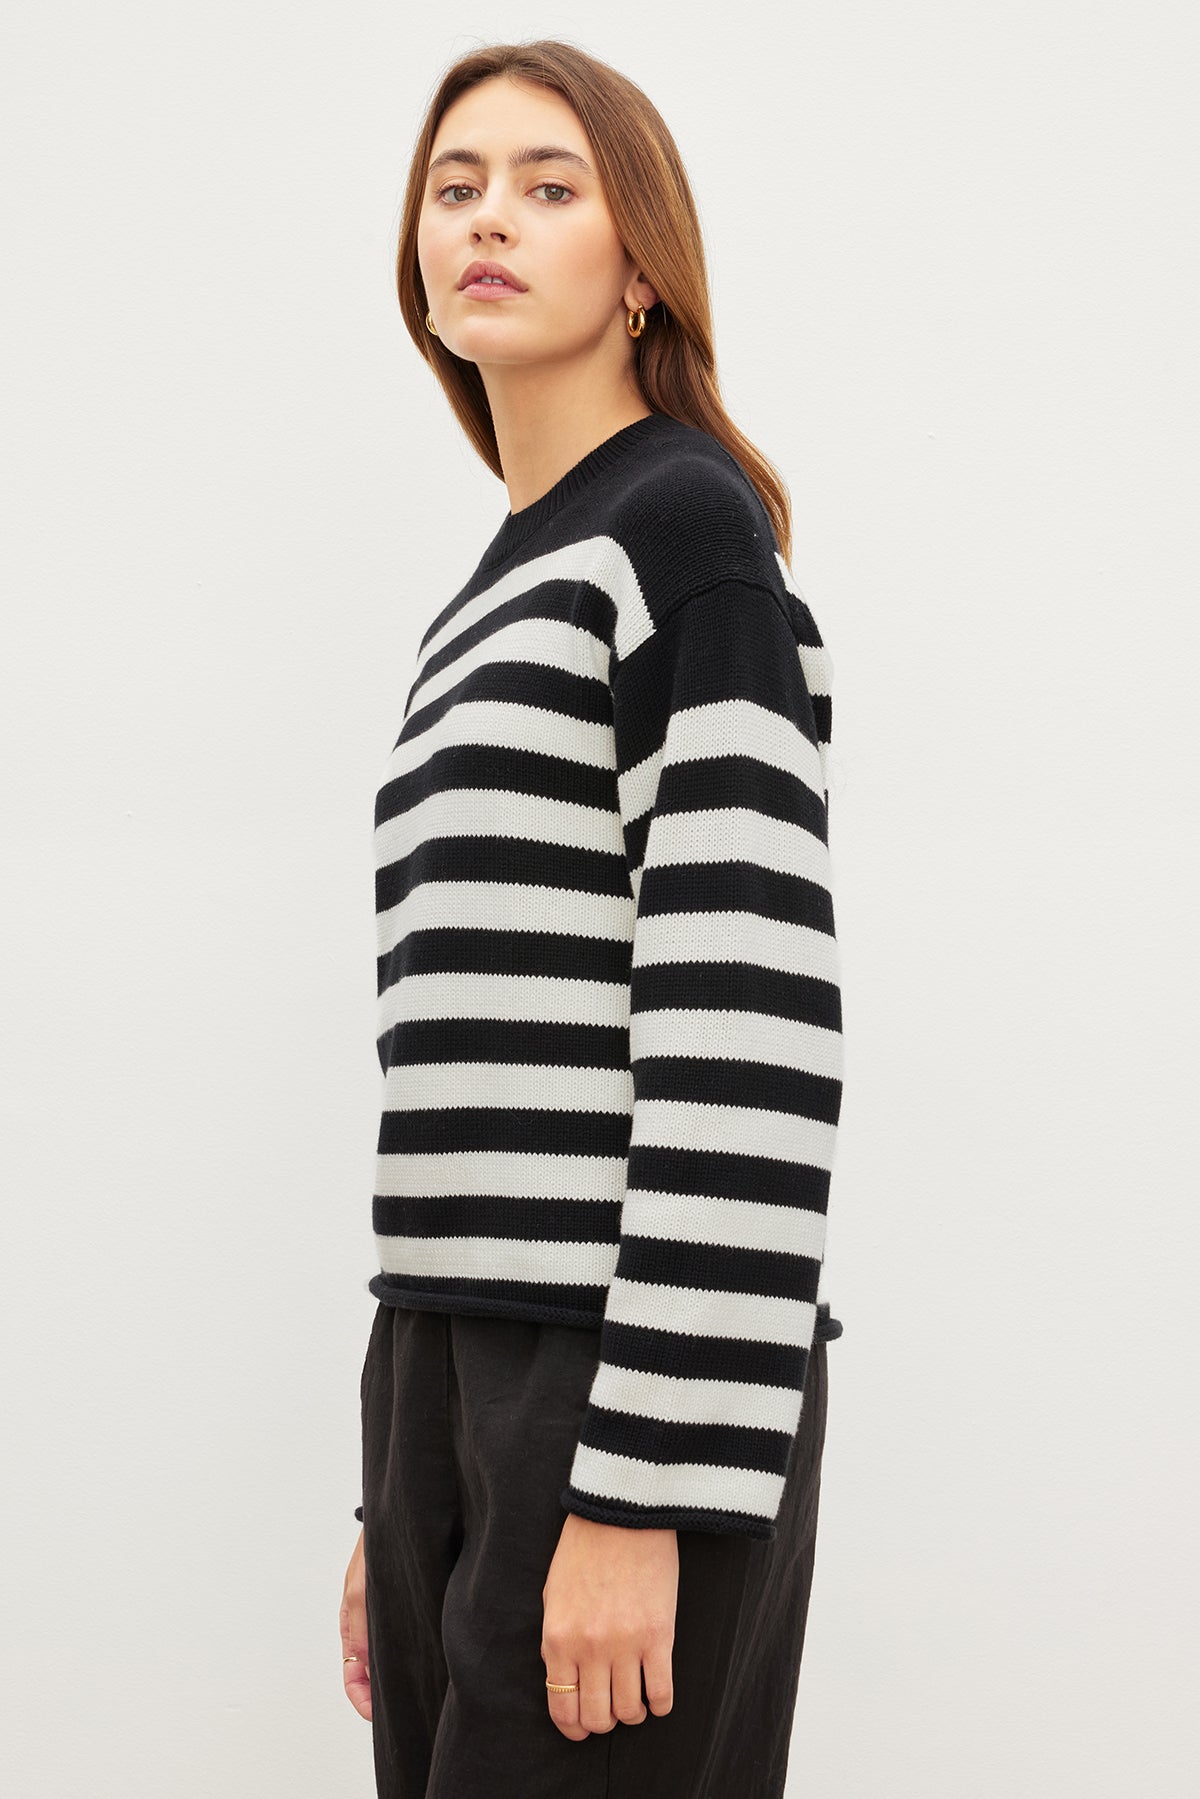   The model is wearing a LEX STRIPED CREW NECK SWEATER by Velvet by Graham & Spencer. 